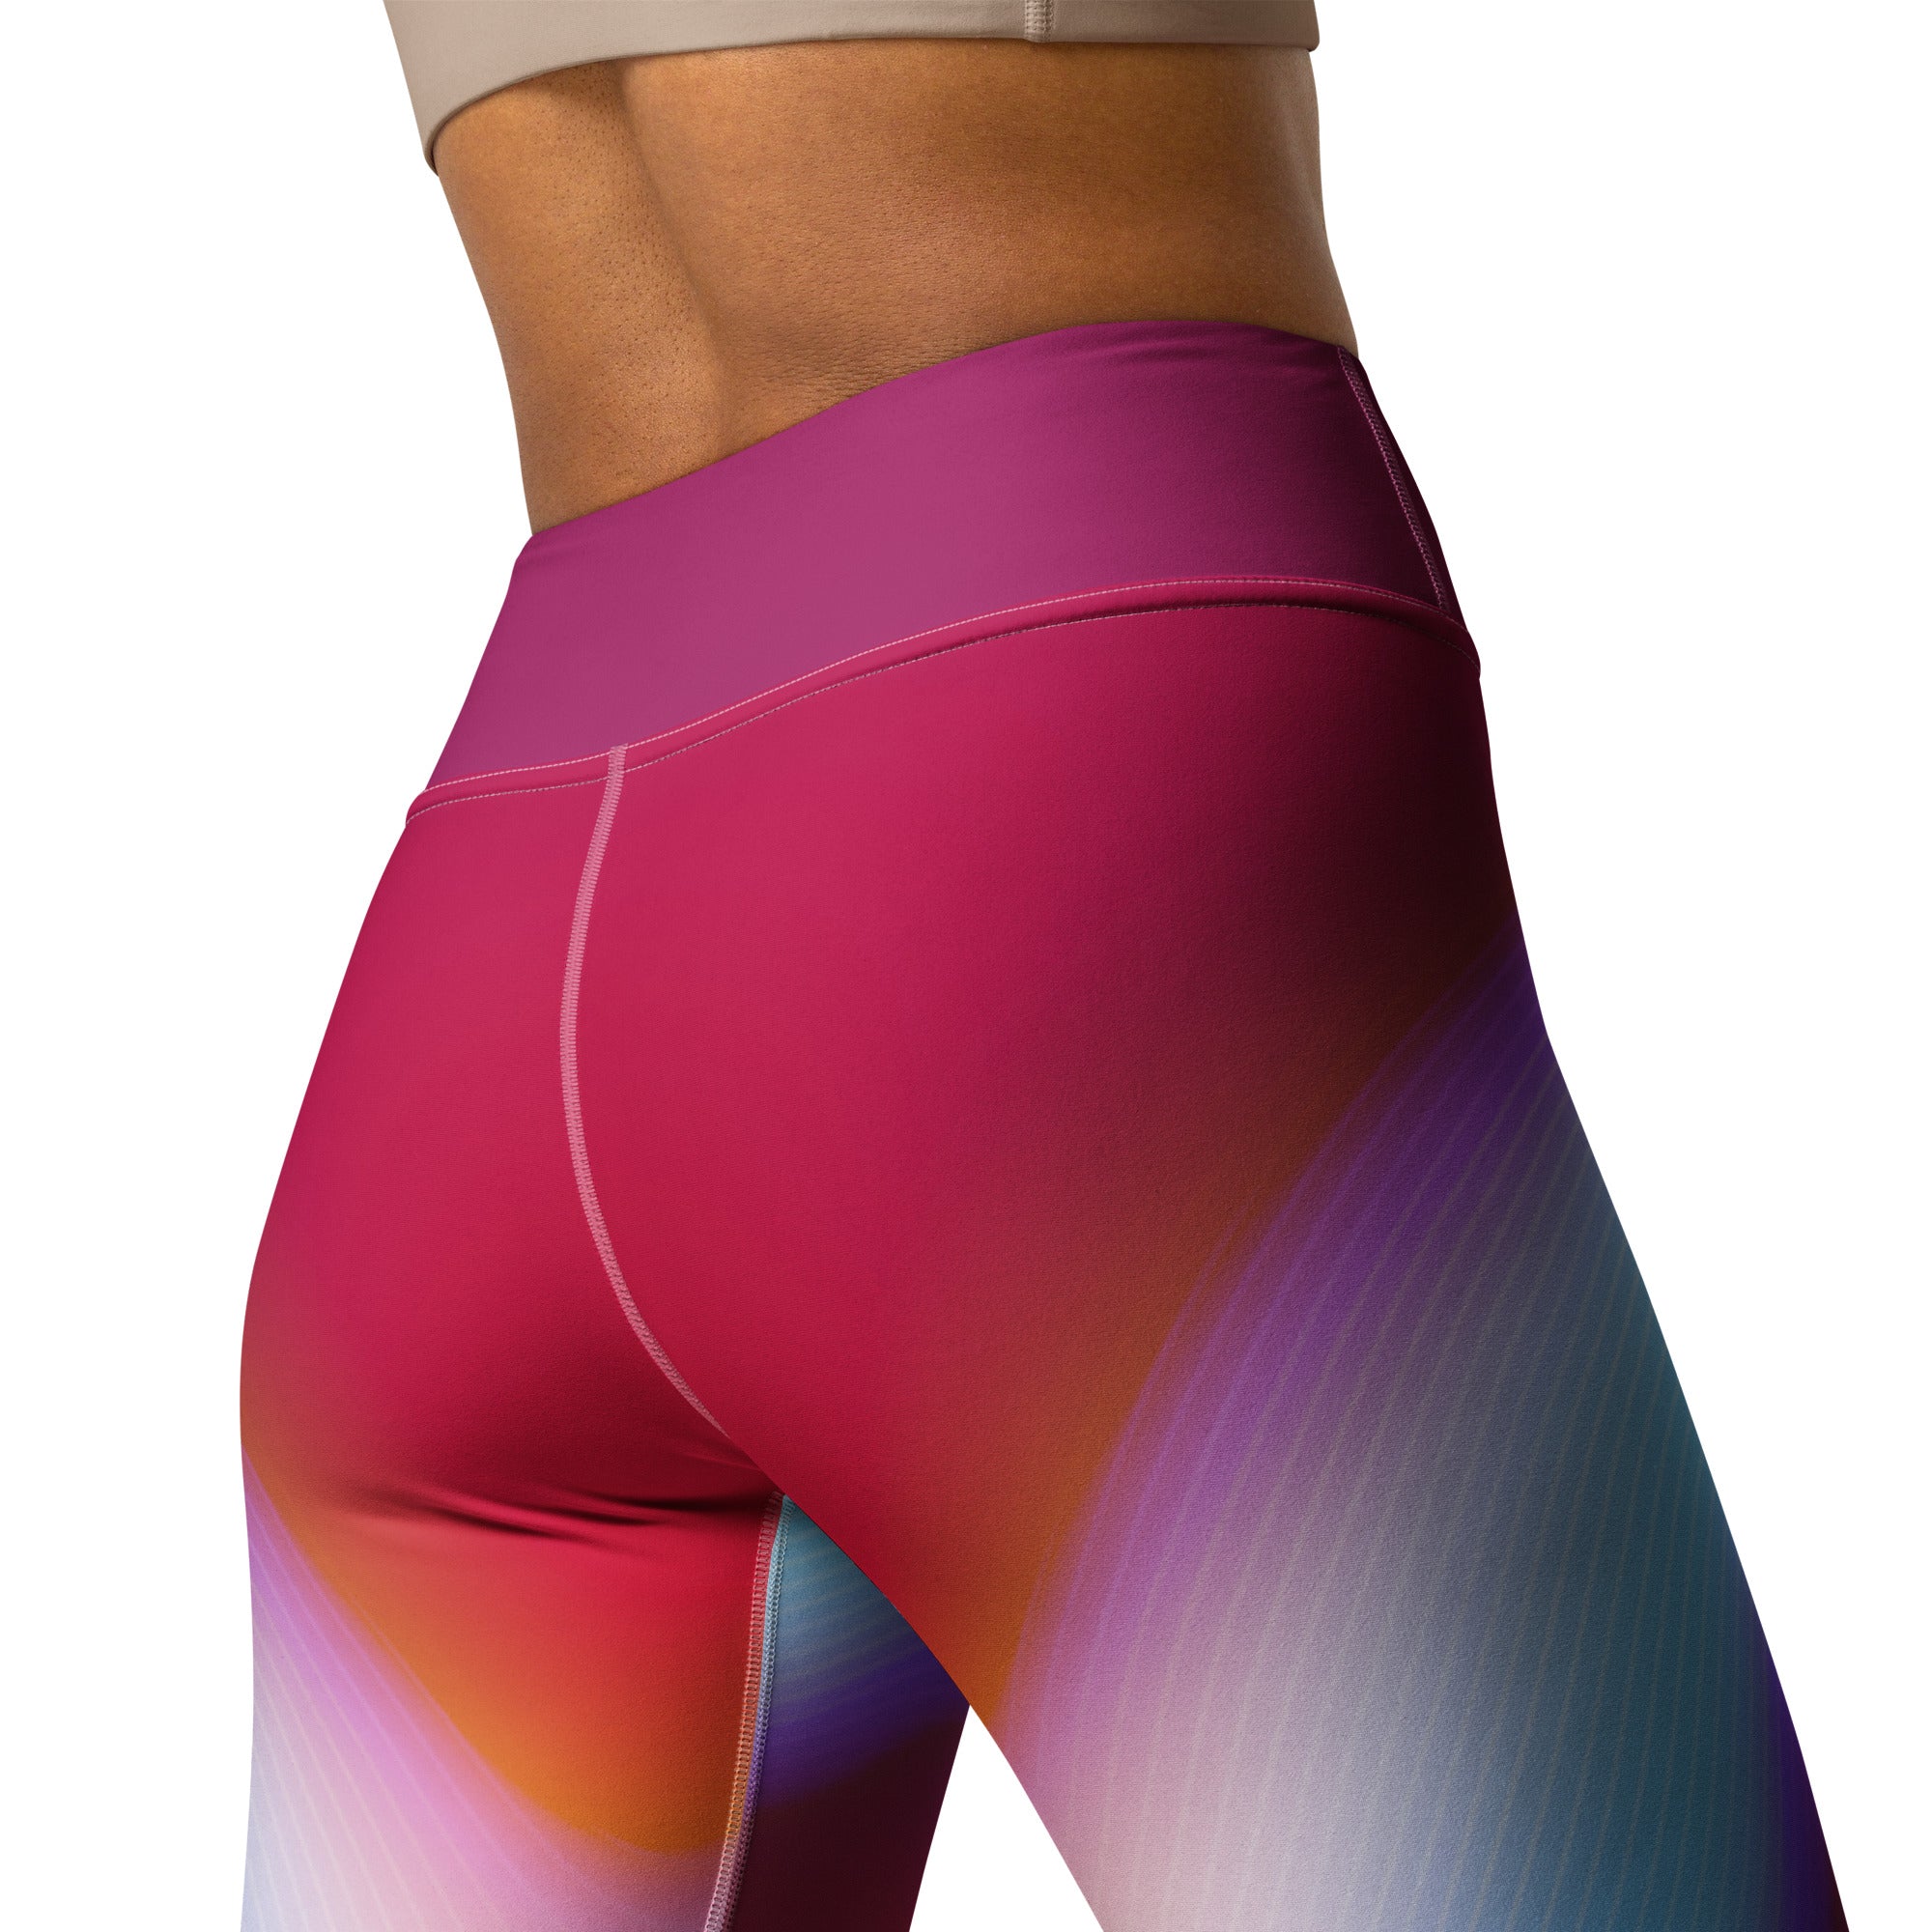 Detail of the vibrant sunset wave pattern on the Wavy Gradient Yoga Leggings.